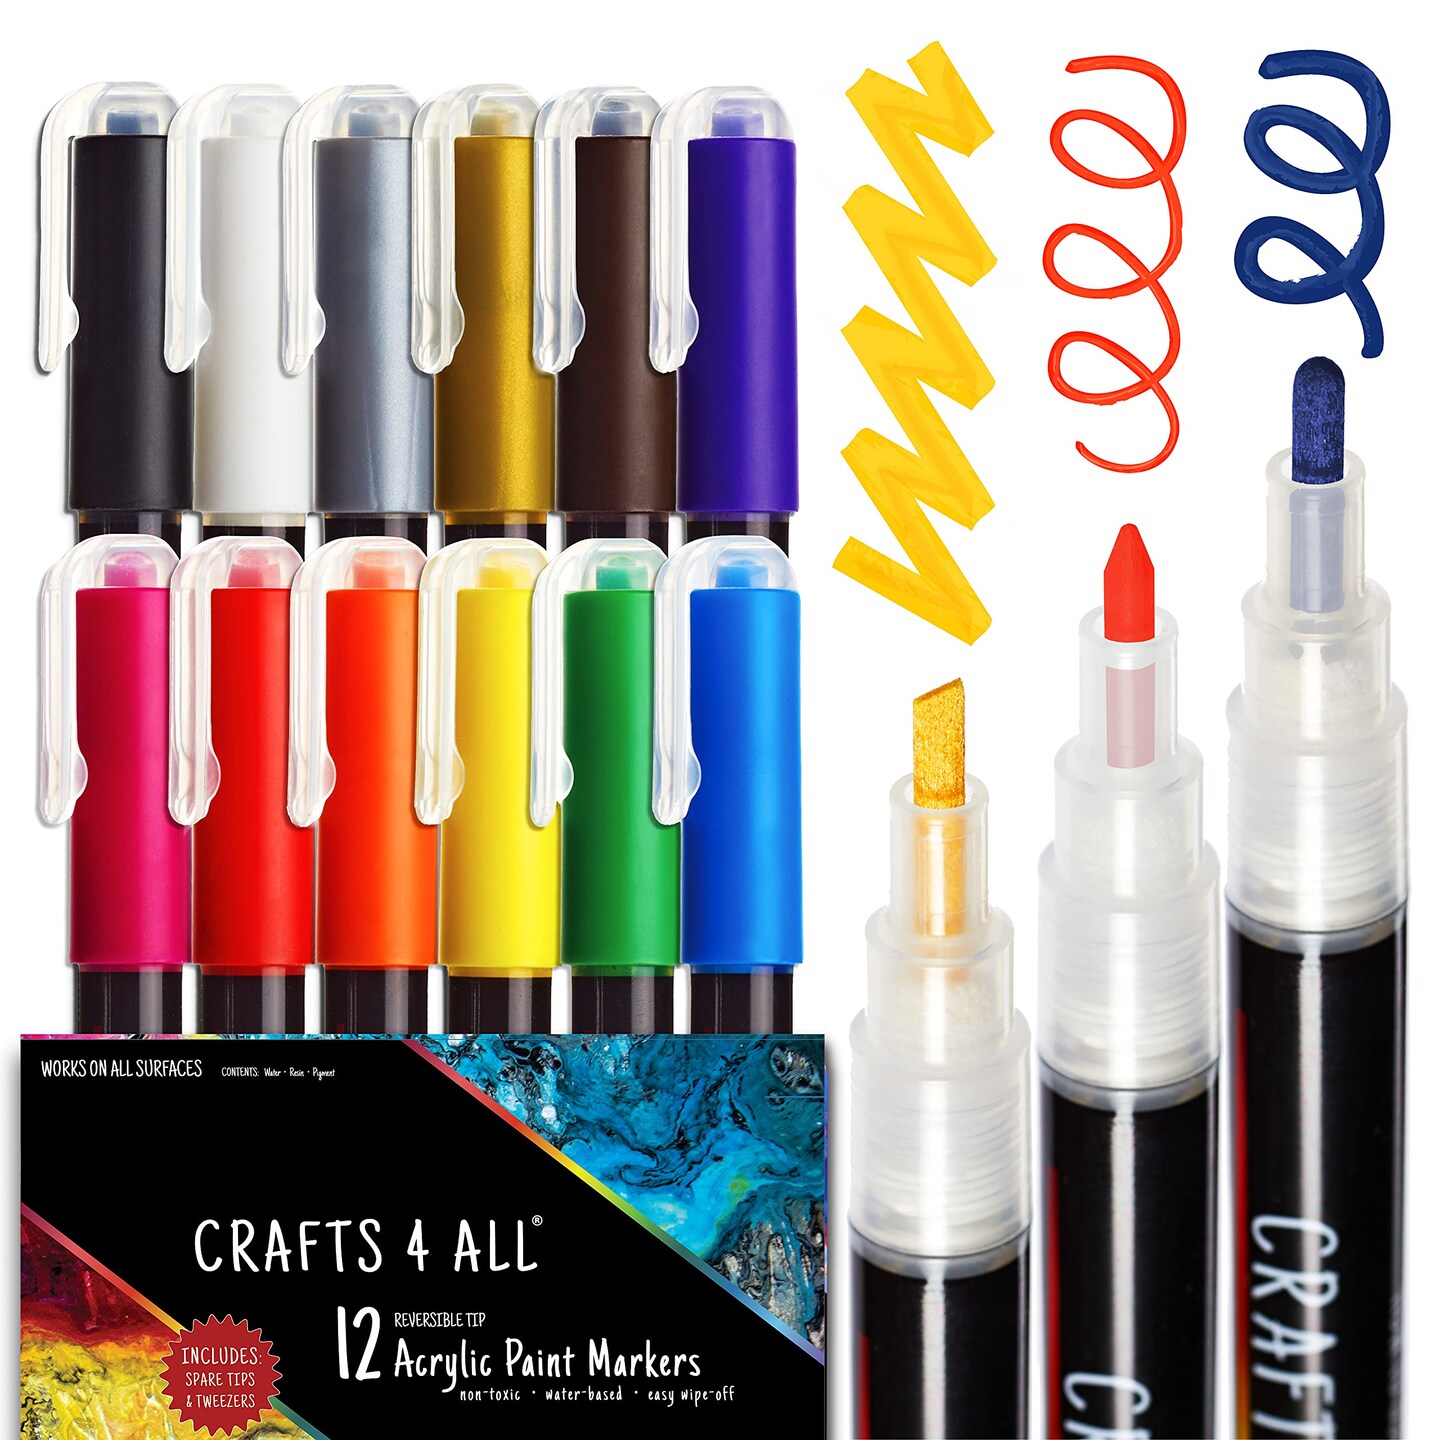 Crafts 4 All Acrylic Paint Markers Set - 12, Fine-Tip Acrylic Paint Pens for Rock Painting, Glass, Wood, Canvas and Fabric - Non-Toxic, Permanent Acrylic Markers for Pumpkin Painting Kit